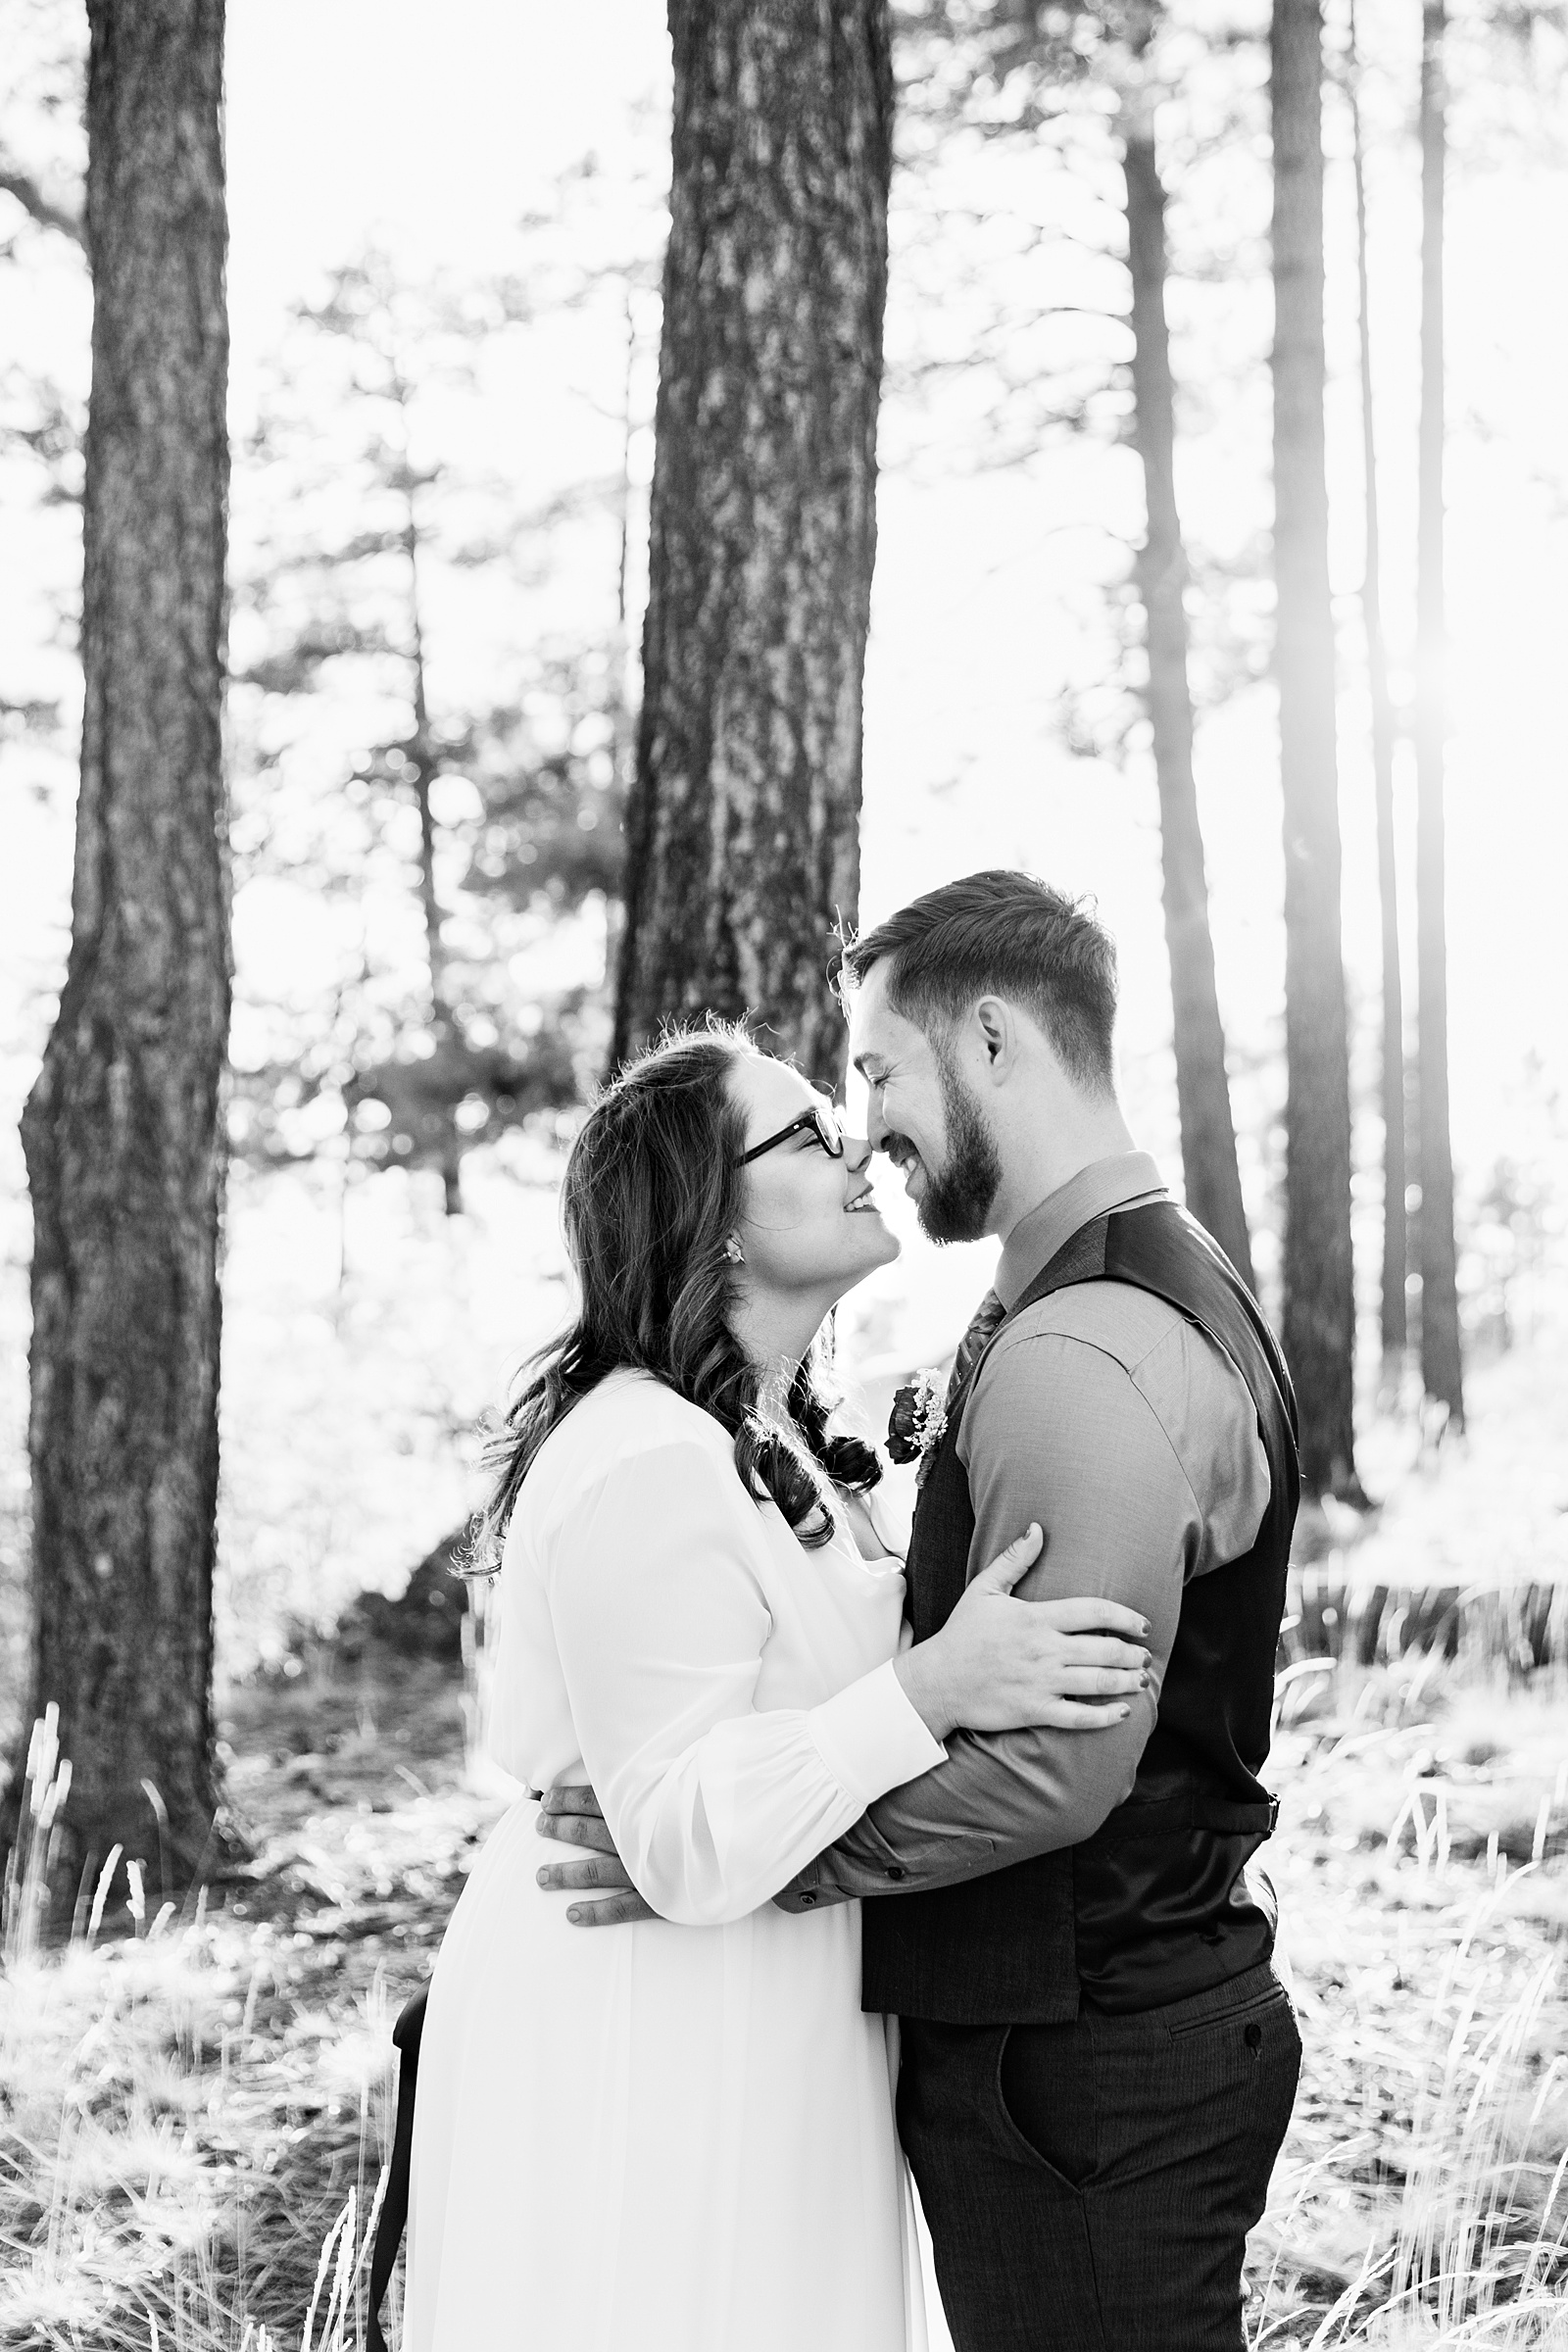 Bride and Groom share an intimate moment during their Mogollon Rim elopement by Payson elopement photographer PMA Photography.